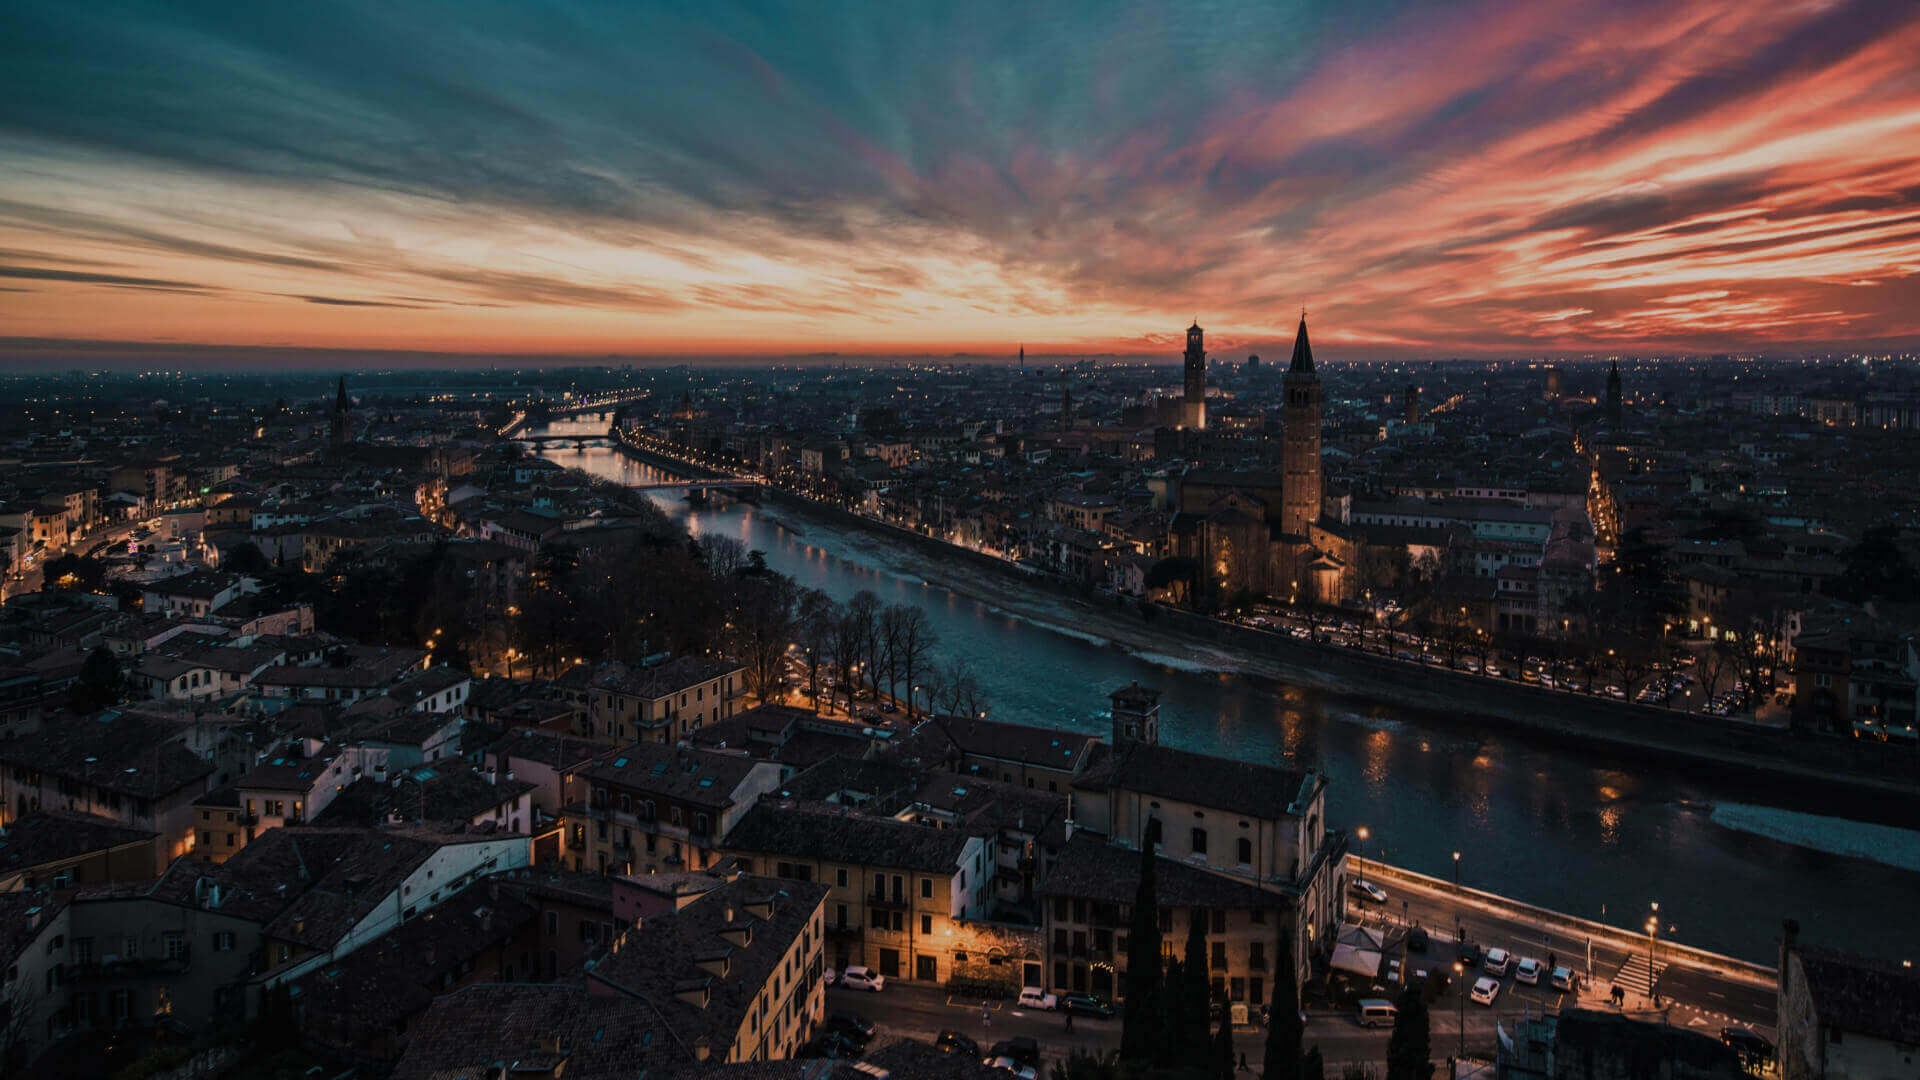 View of the centre of Verona from above over the Adige River at sunset